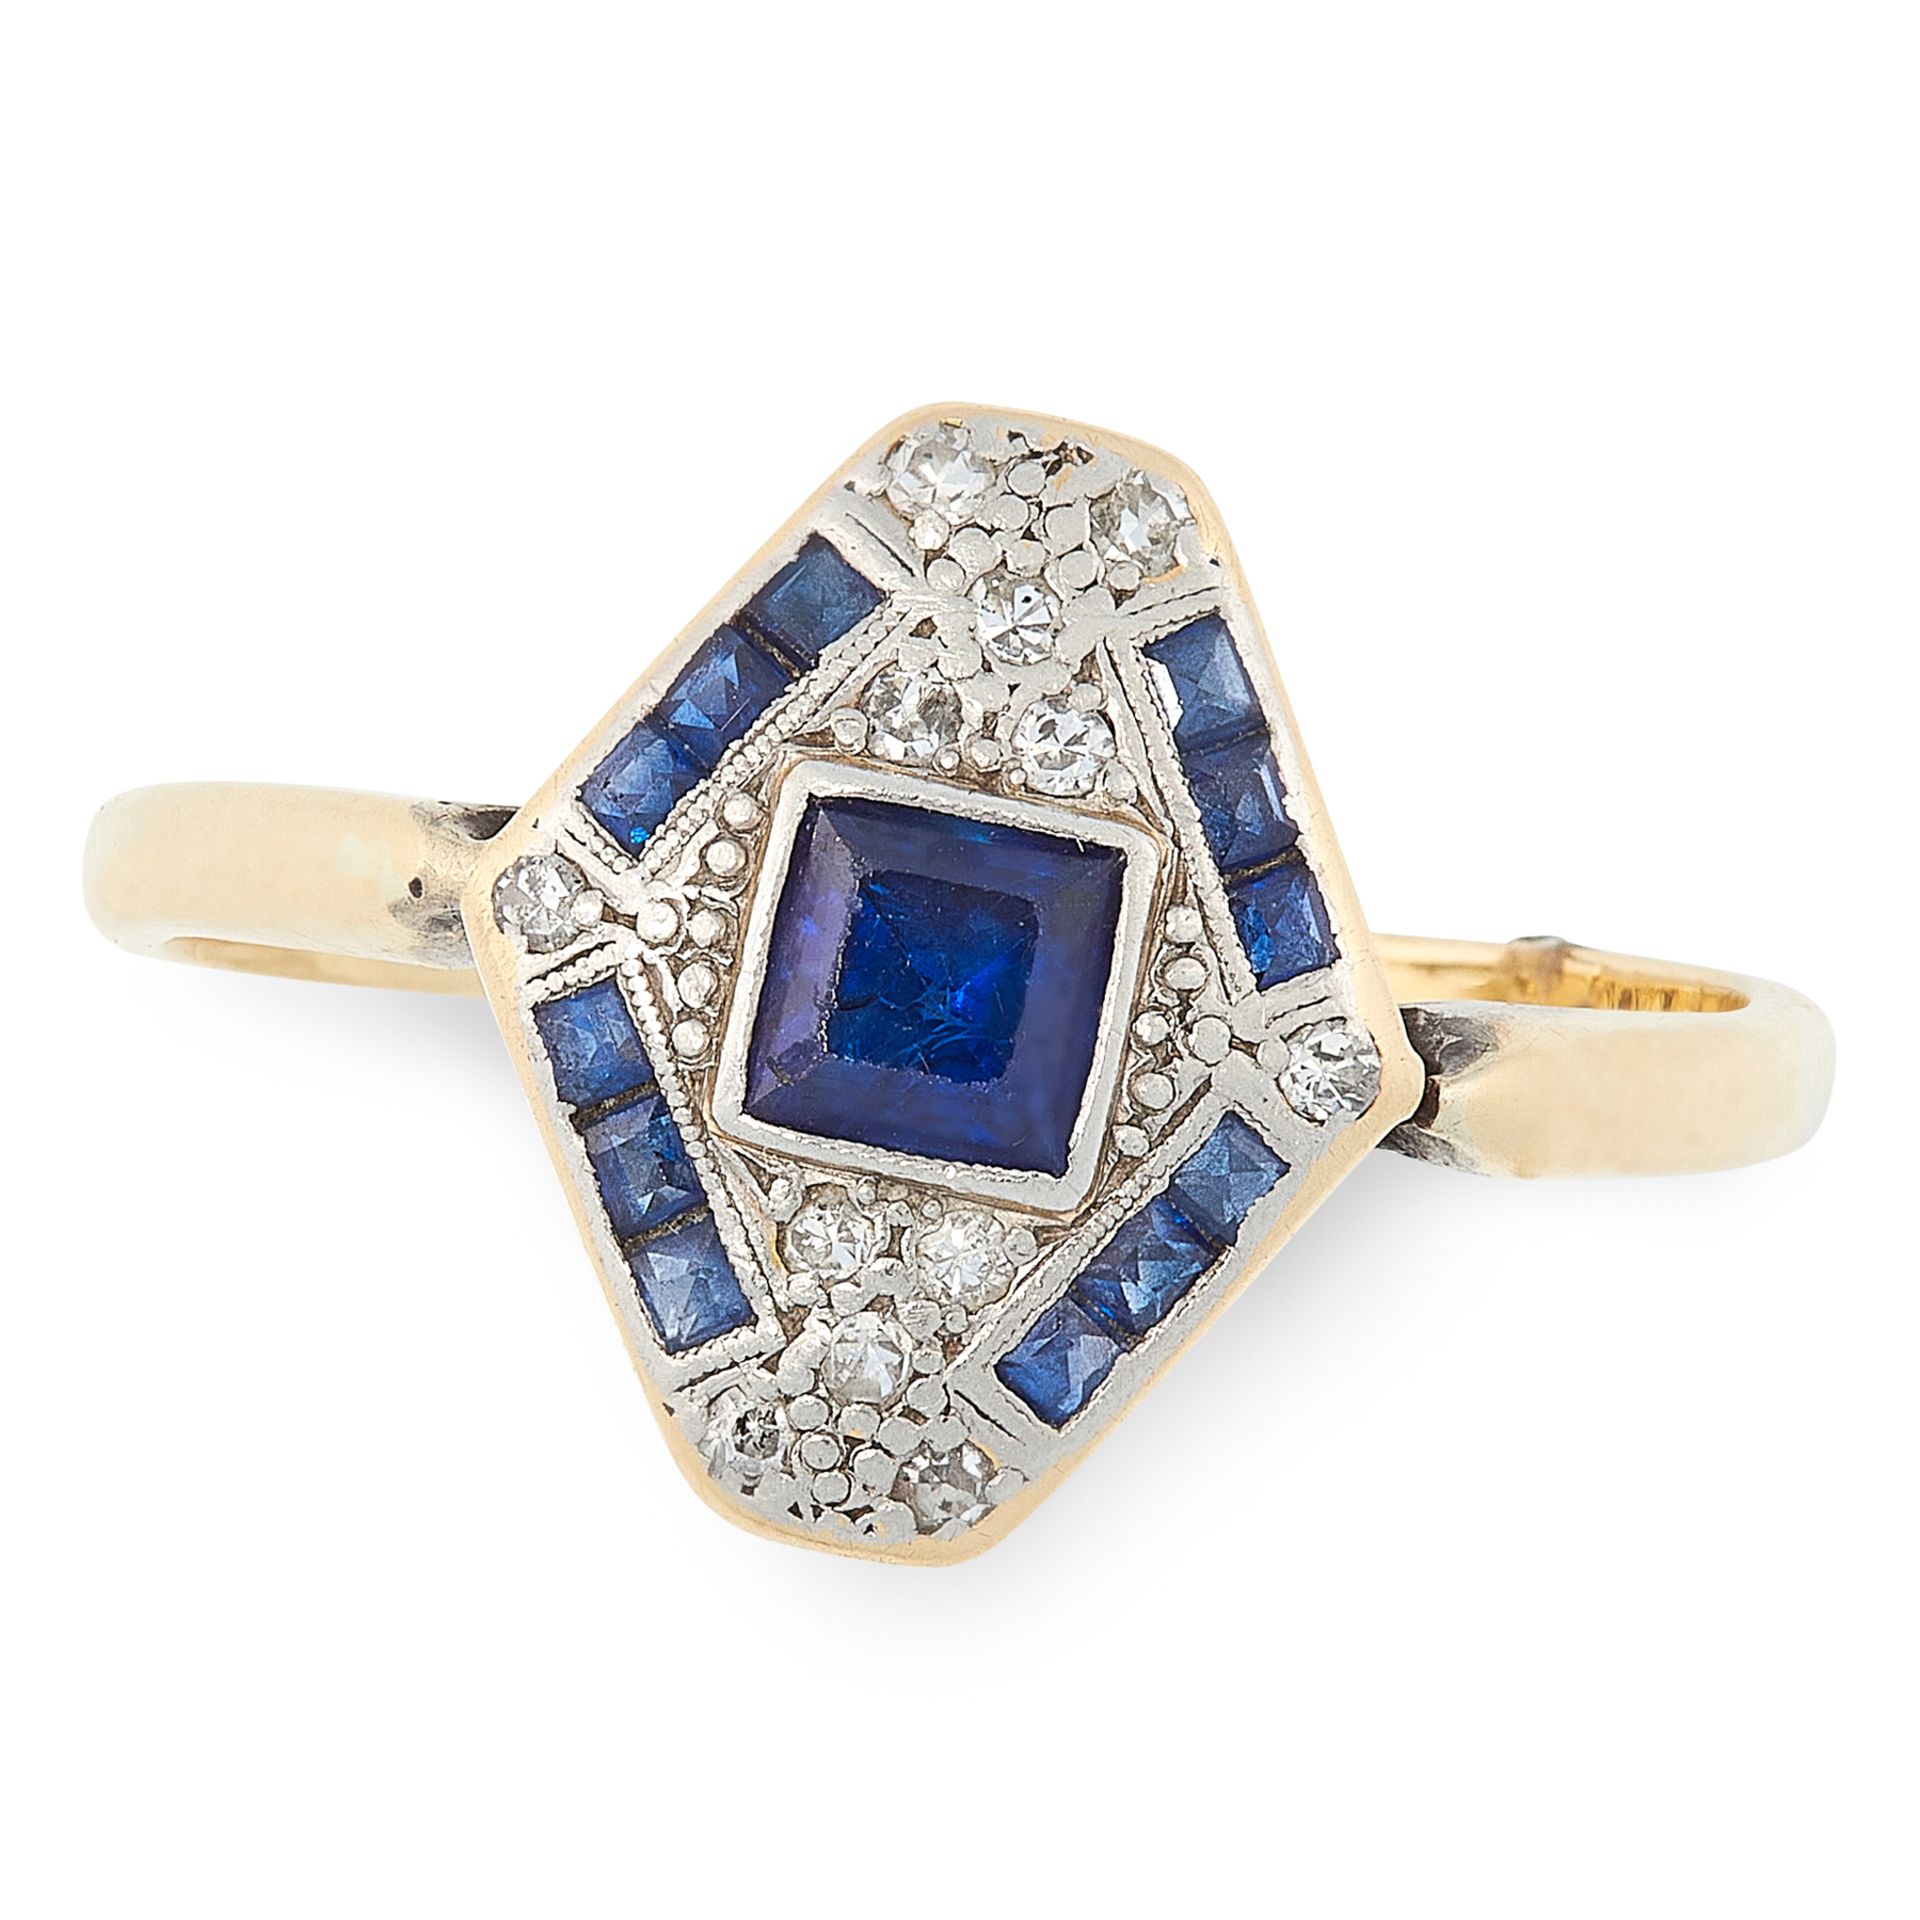 AN ART DECO SAPPHIRE AND DIAMOND RING in 18ct yellow gold and platinum, the hexagonal face set